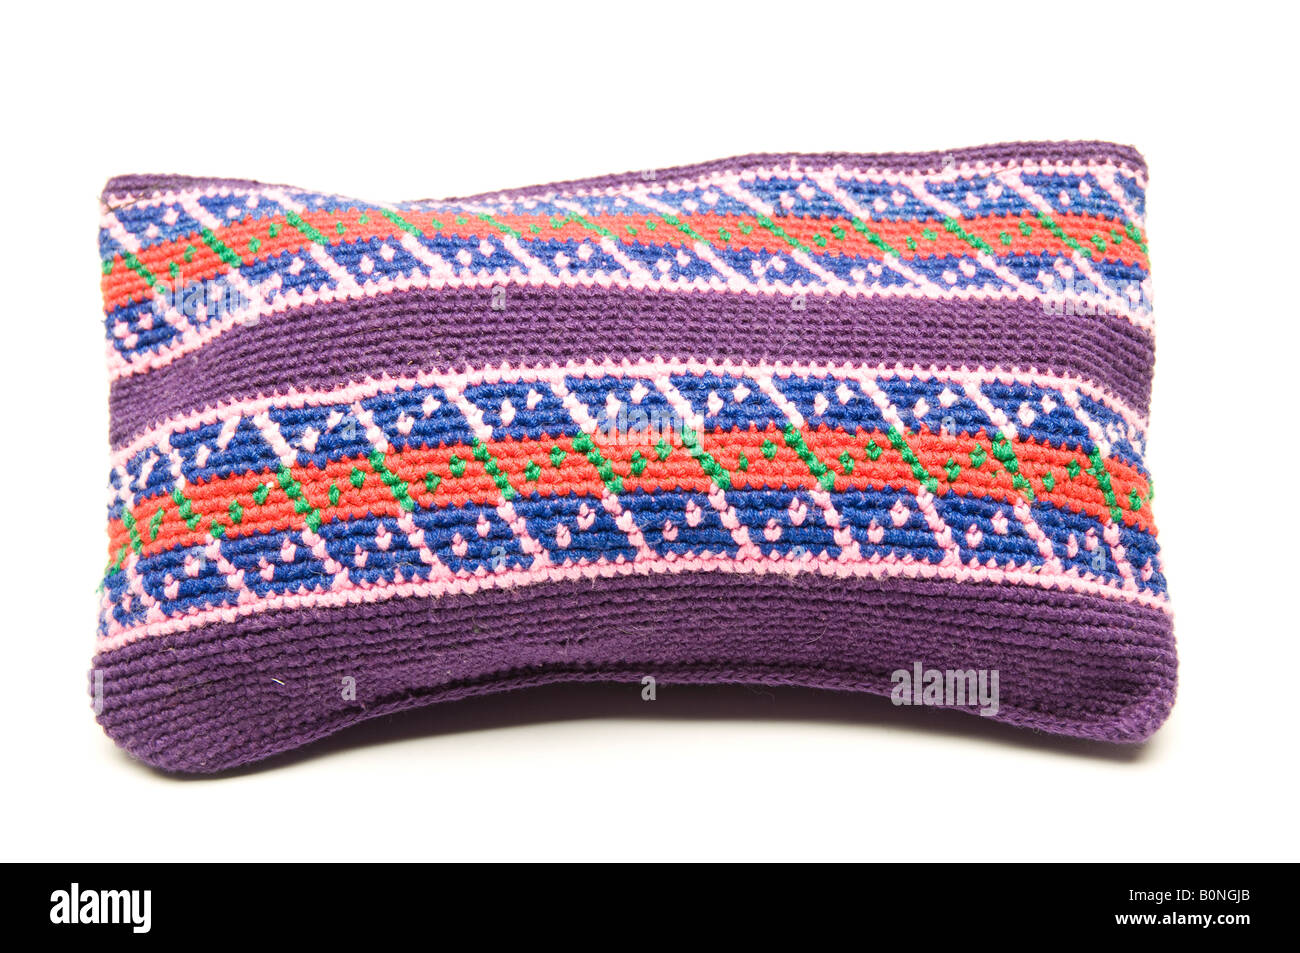 knitted hand made change purse handbag produced in honduras central america Stock Photo